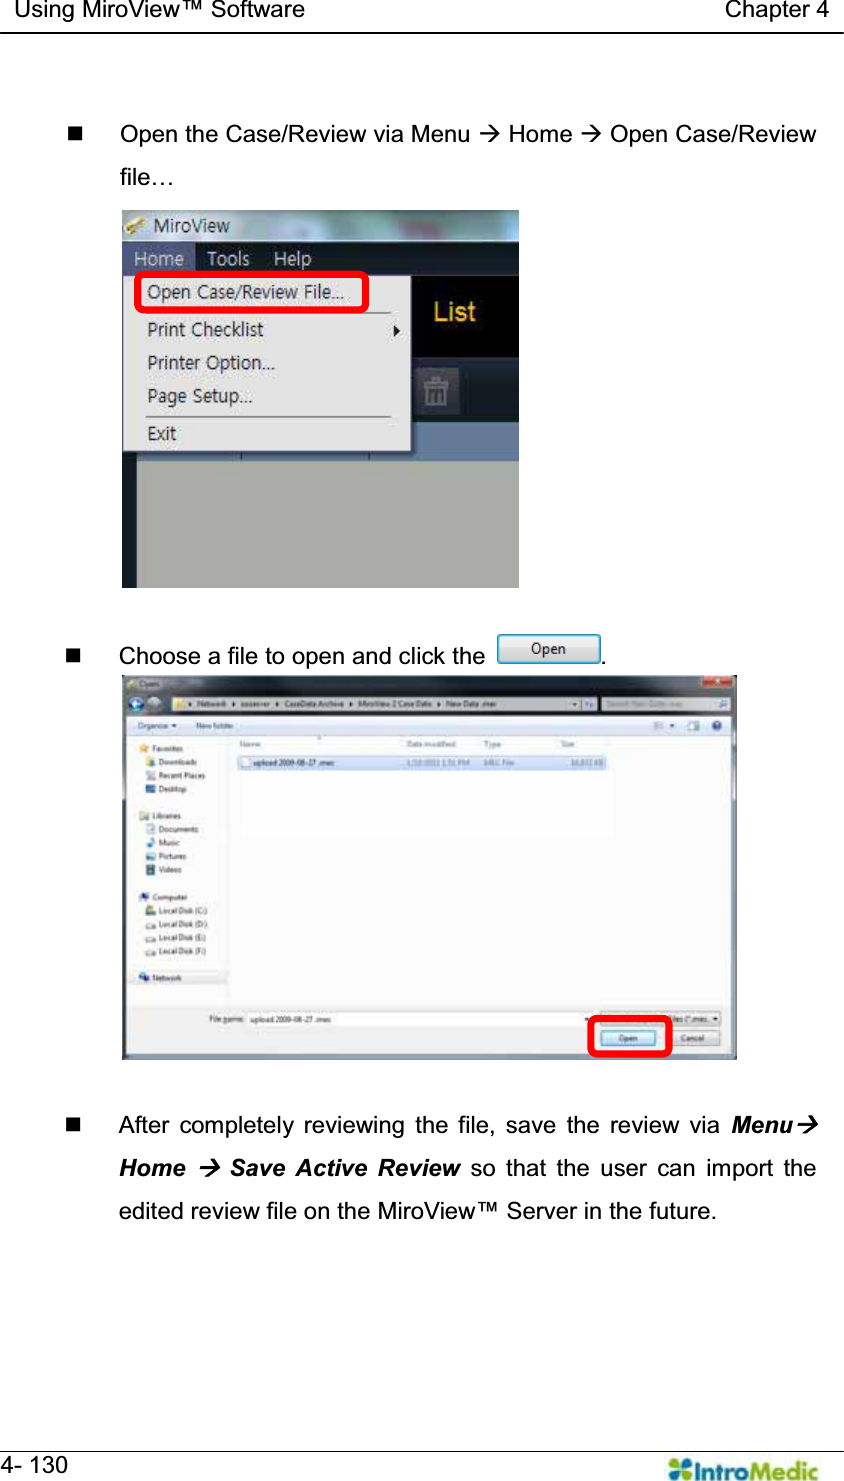   Using MiroView Software                                   Chapter 4   4- 130    Open the Case/Review via Menu Æ Home Æ Open Case/Review ILOH«     Choose a file to open and click the  .    After completely reviewing the file, save the review via MenuÆ Home Æ Save Active Review so that the user can import the edited review file on the 0LUR9LHZServer in the future.    